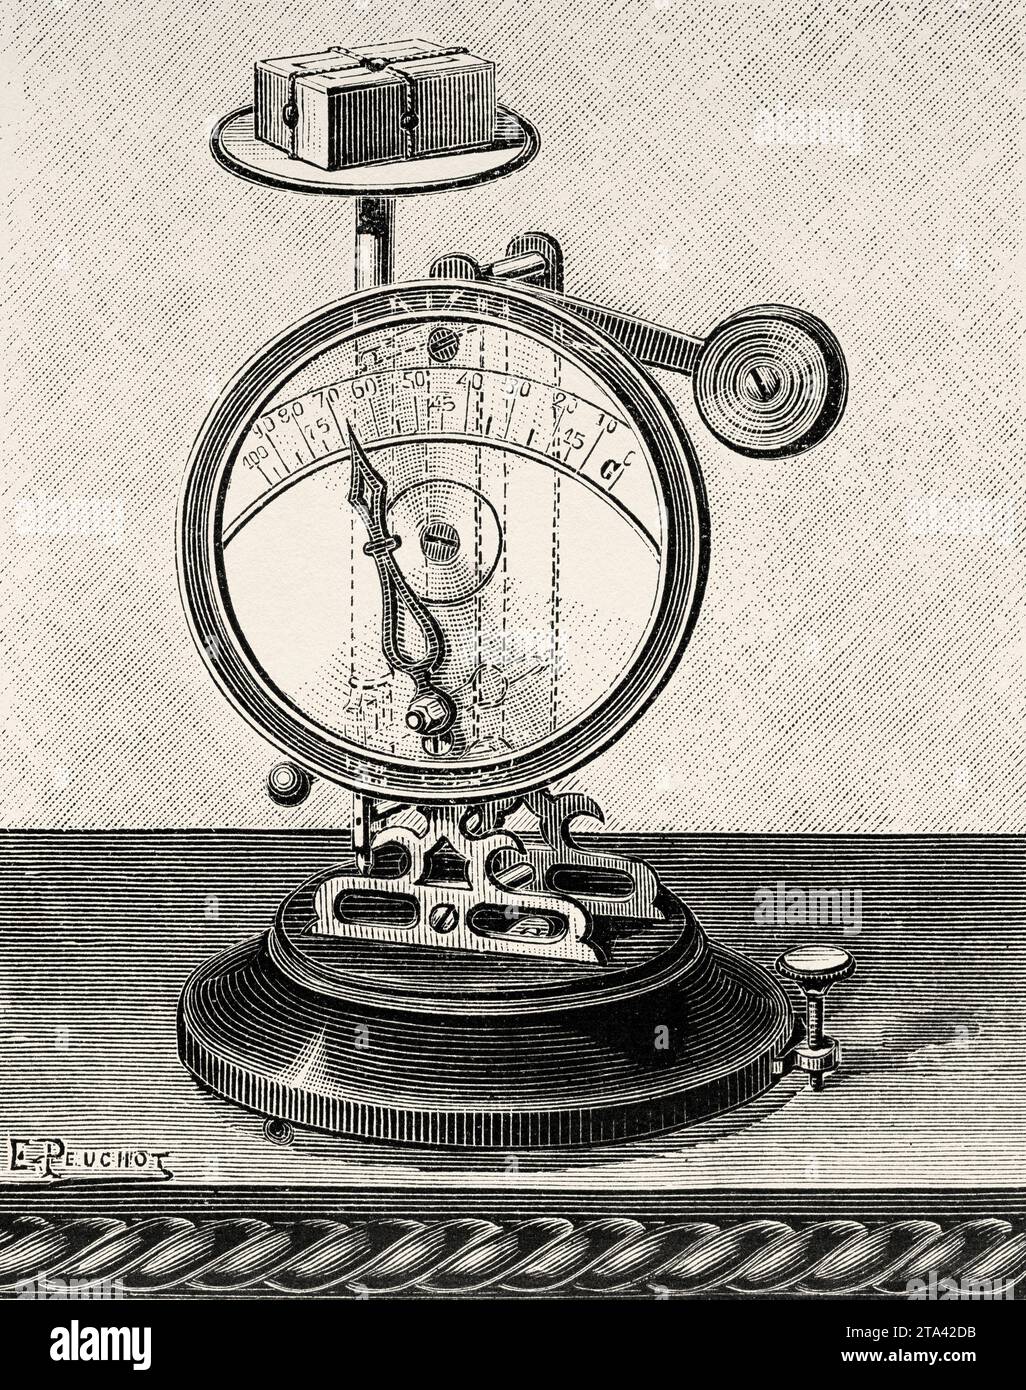 Pressure gauge scale without weight. Old illustration from La Nature 1887 Stock Photo